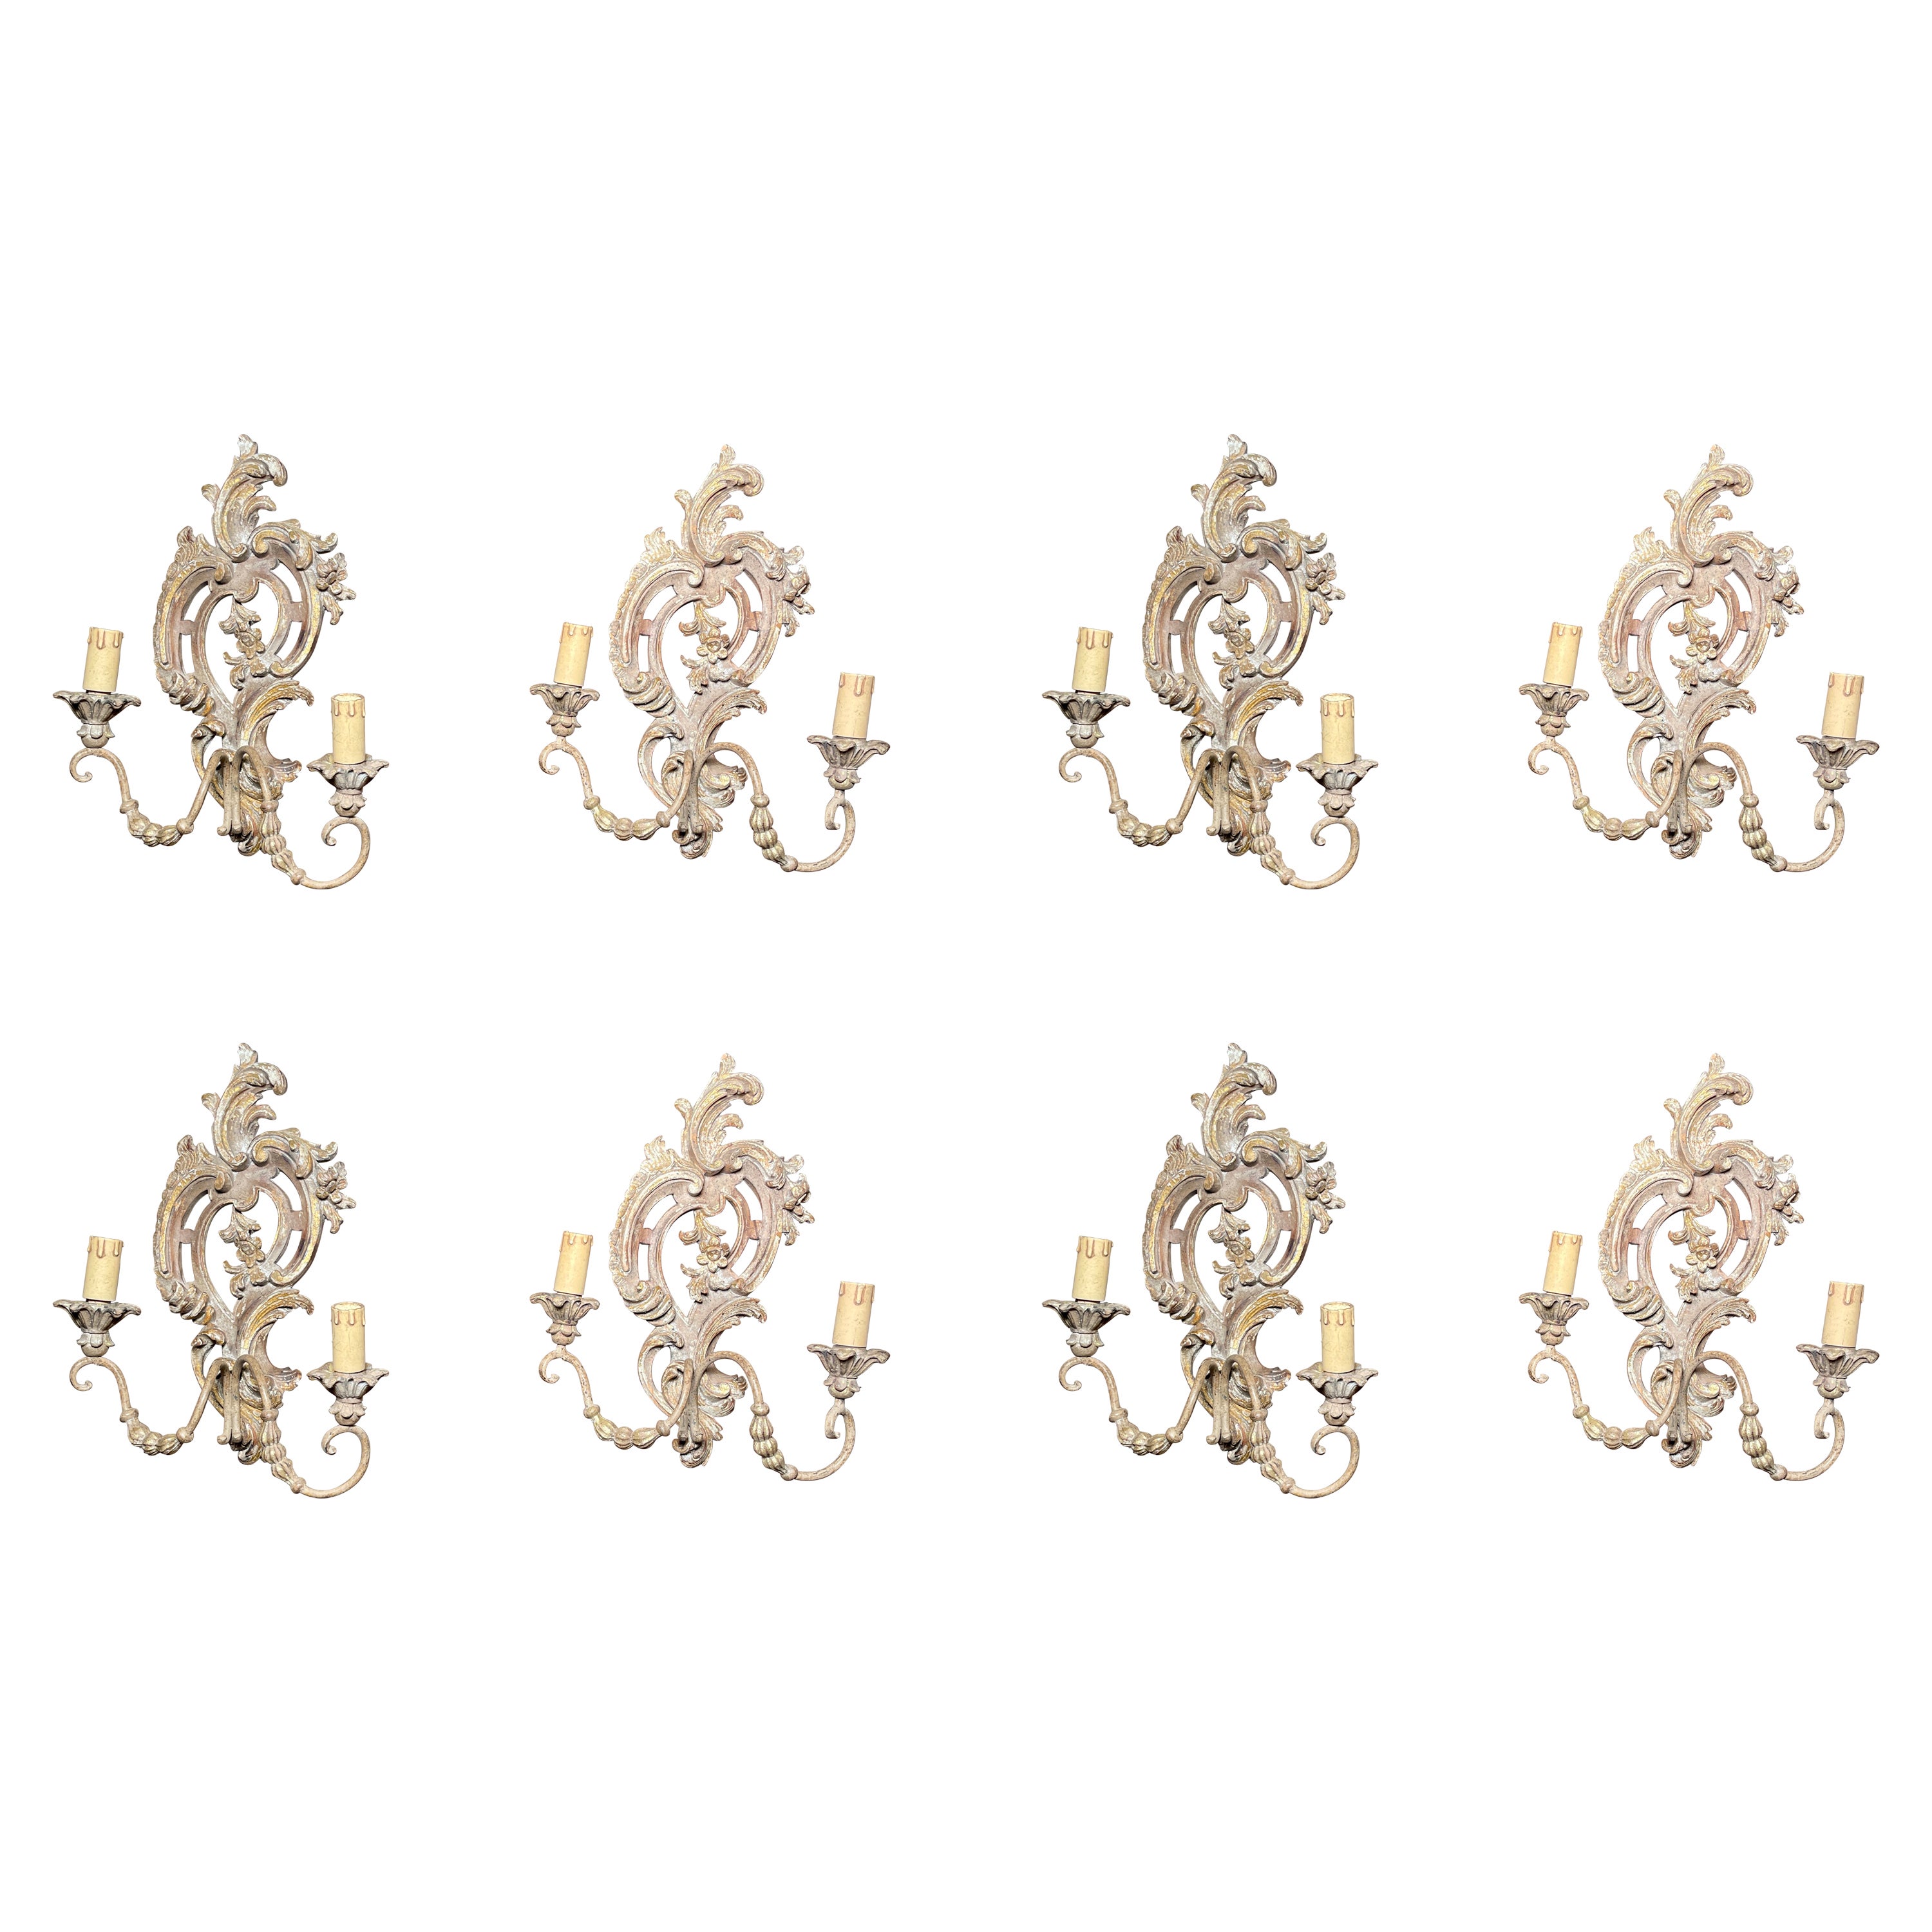 Set Of 8 Antique French Baroque Carved Wood Wall Sconces, Circa 1900.